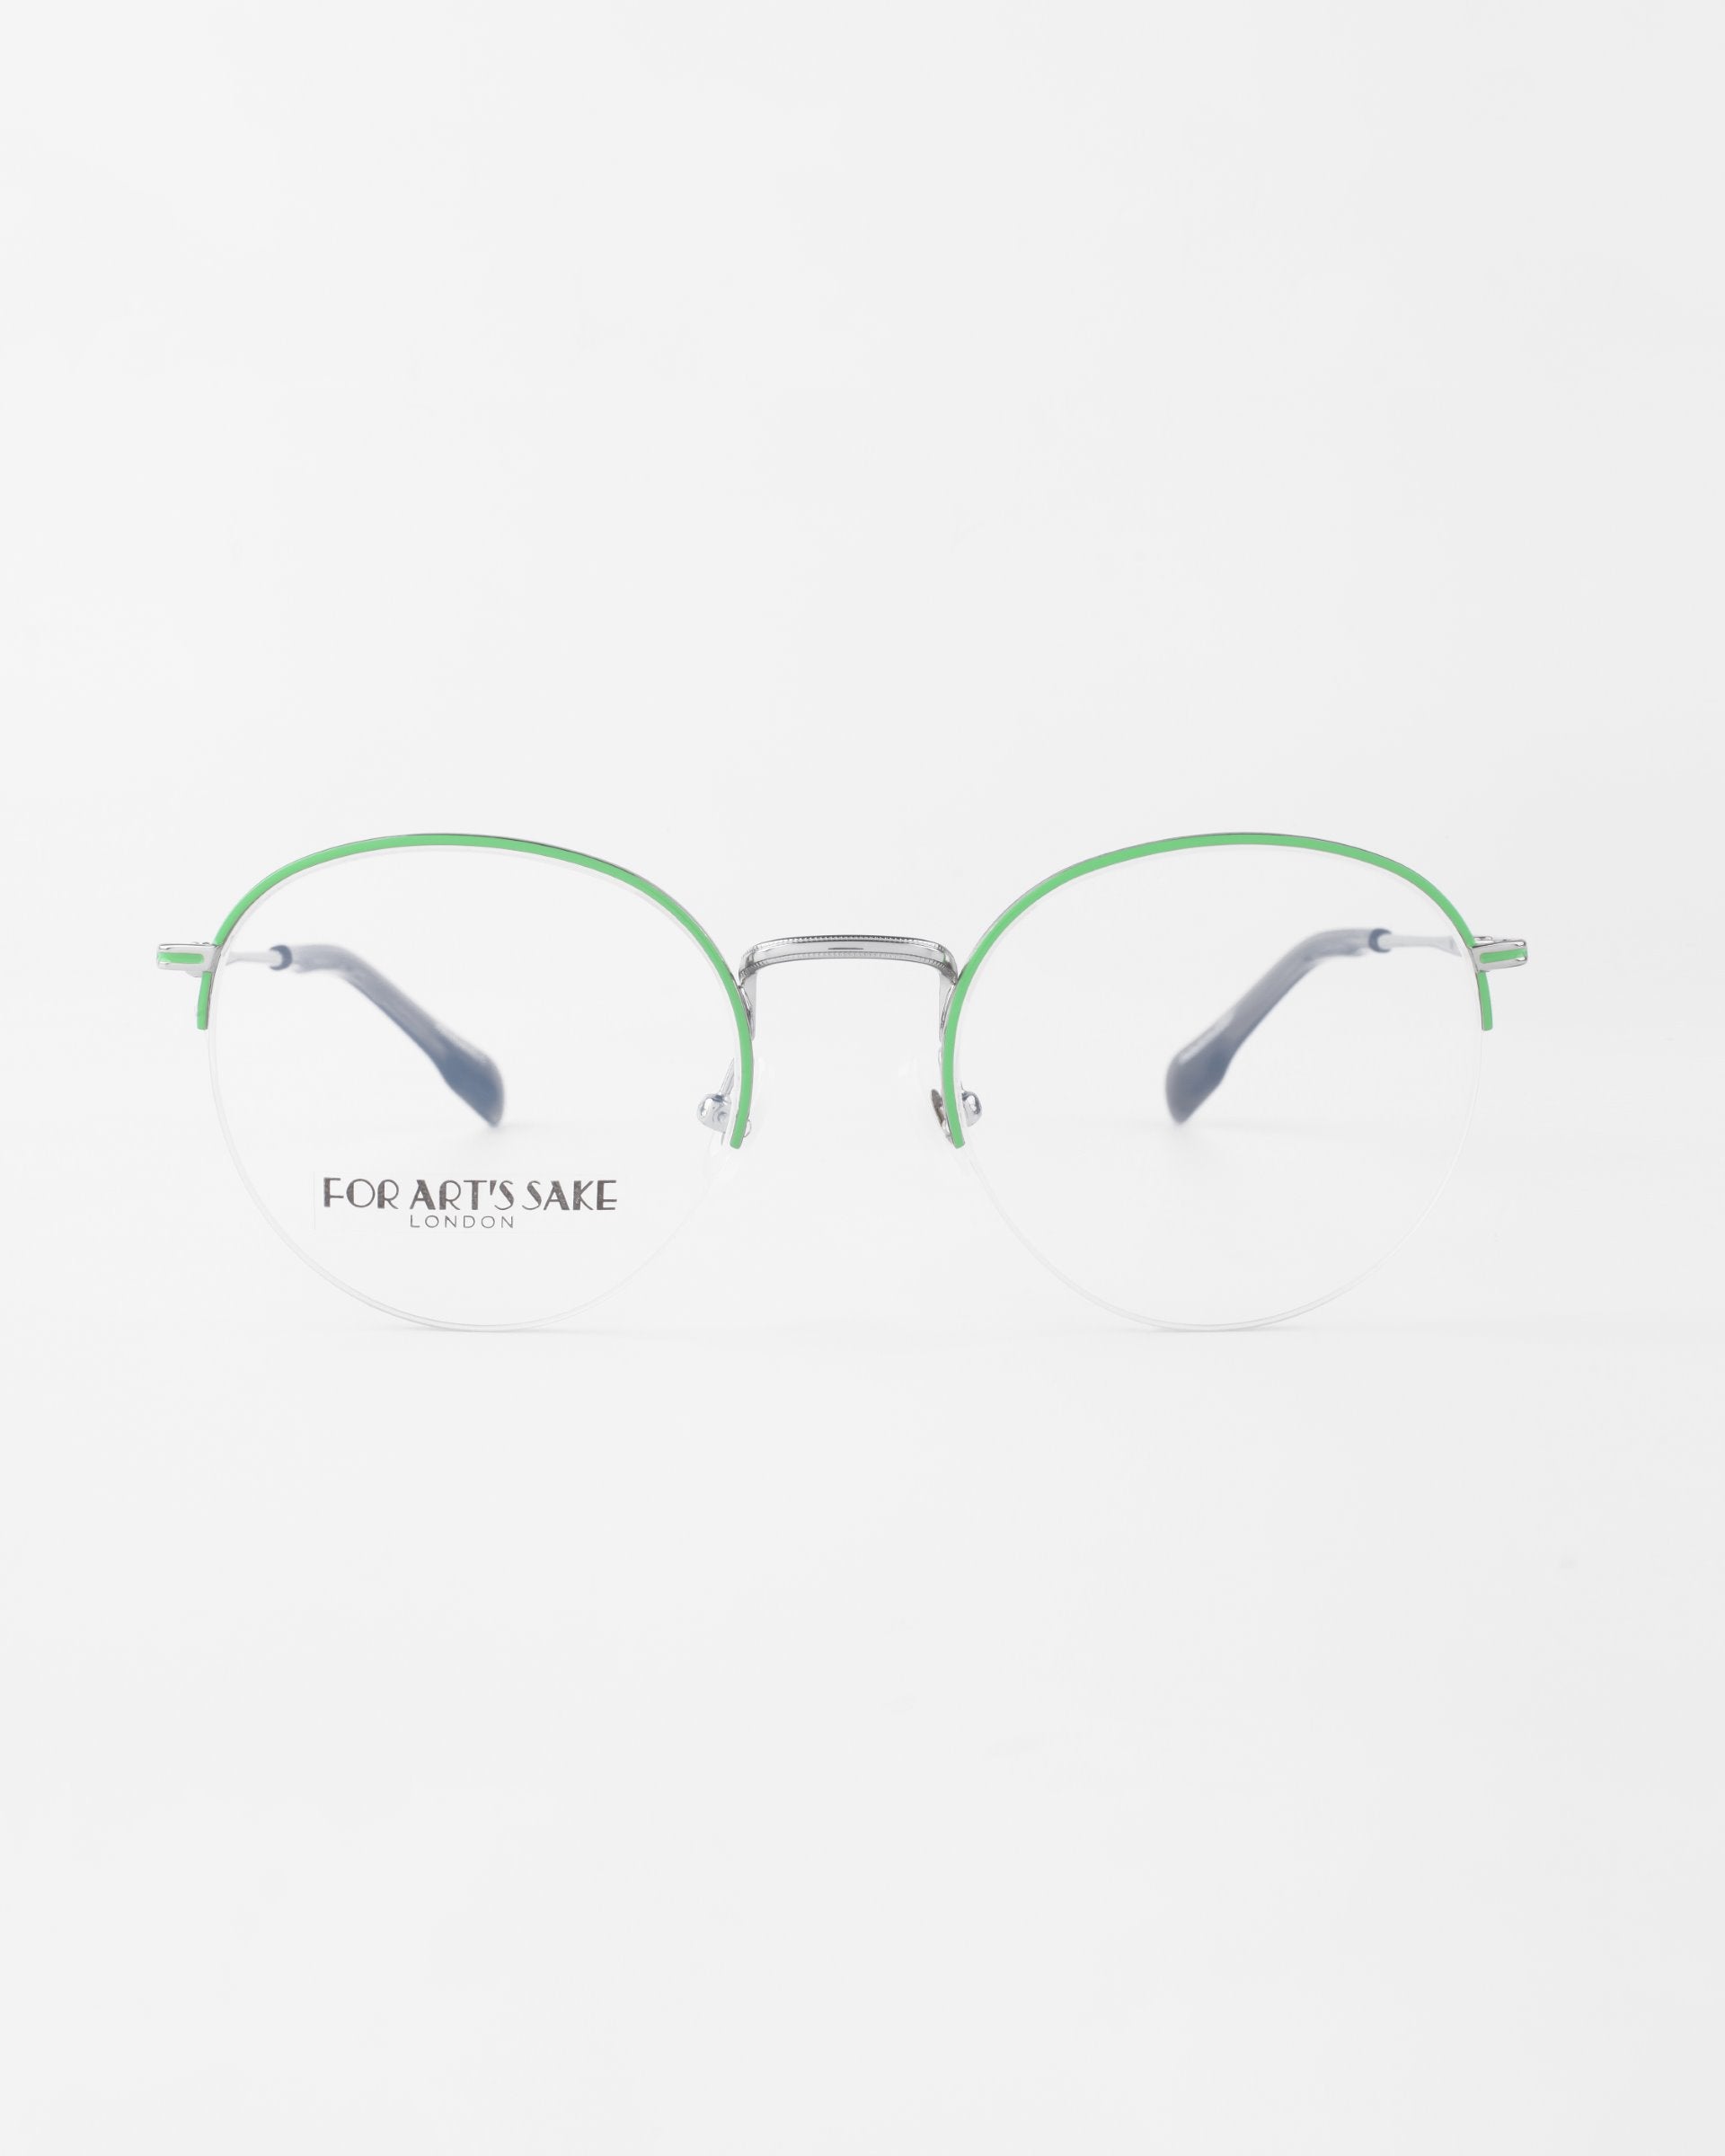 A pair of Ivy eyeglasses with thin, green metal frames and clear lenses featuring a blue light filter. The temples are silver and tipped in black. The brand name "For Art's Sake®" is visible on the left lens. The eyeglasses are set against a plain white background.